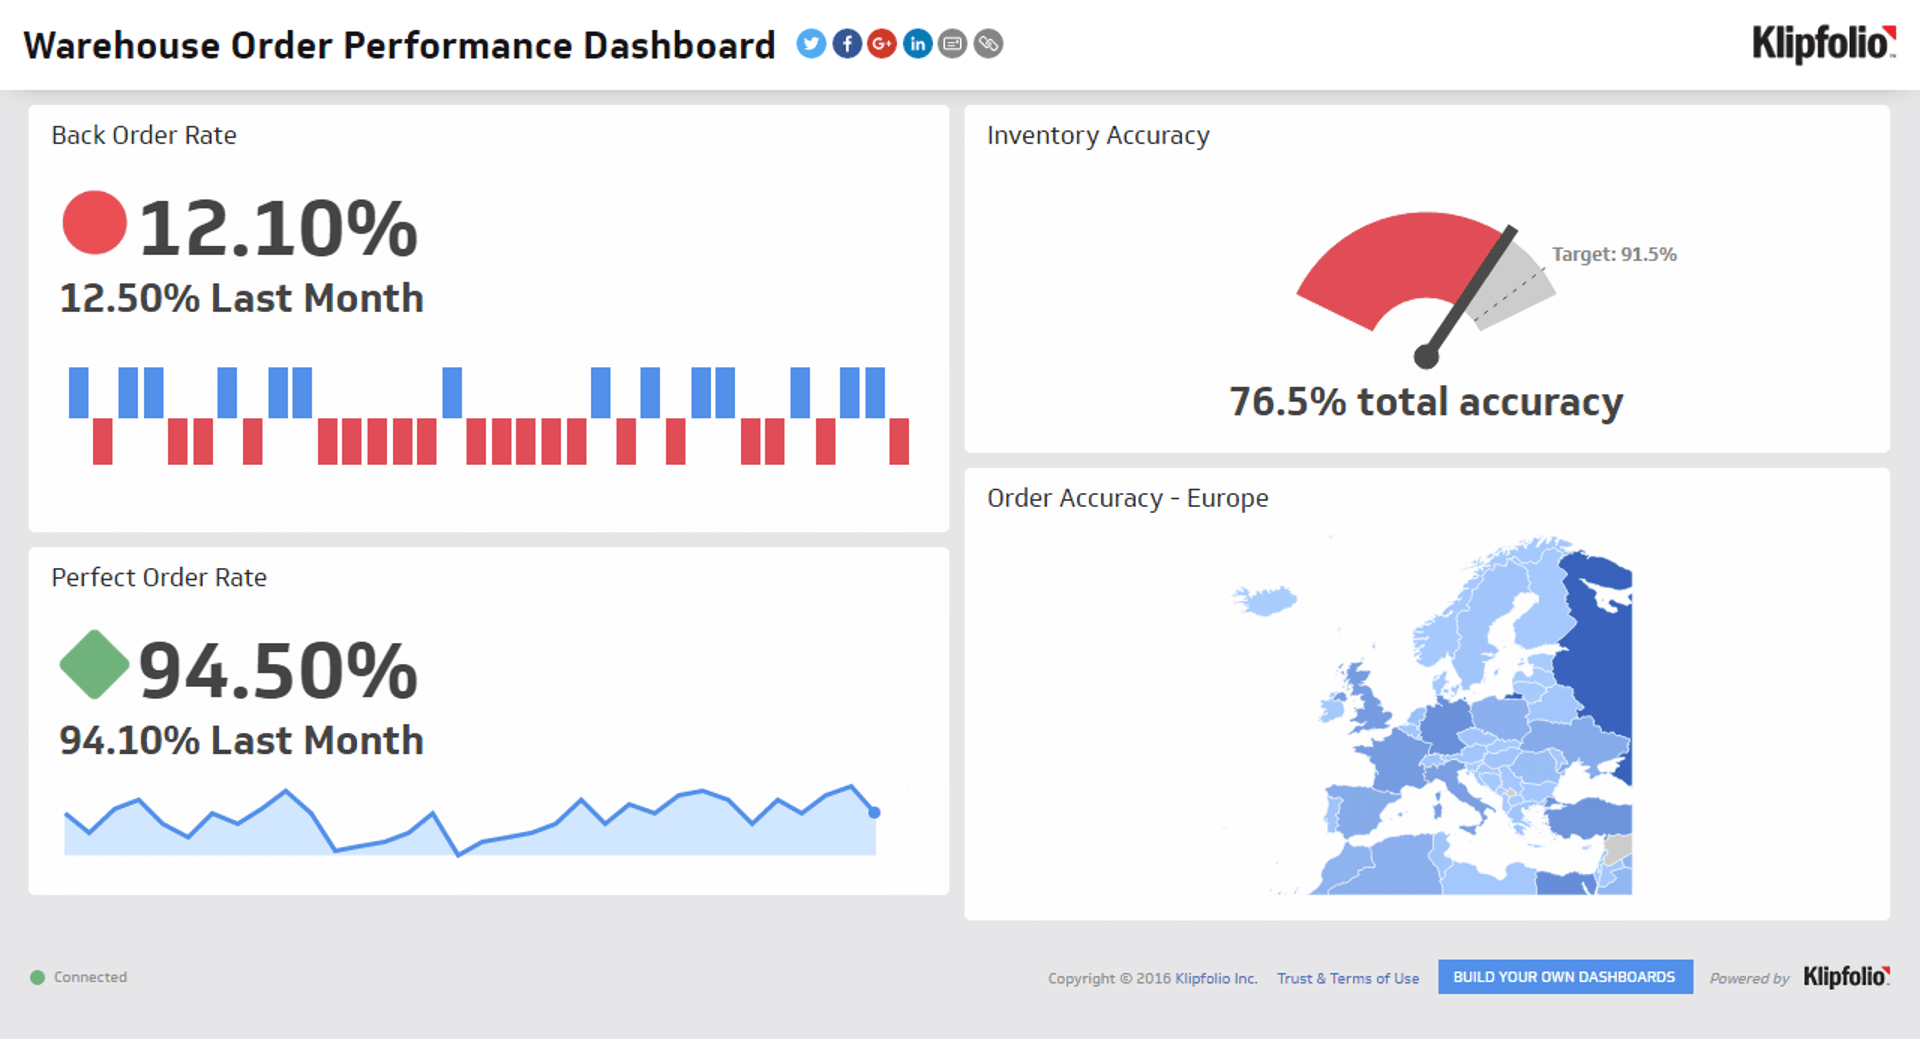 Related Dashboard Examples - Warehouse Order Performance Dashboard